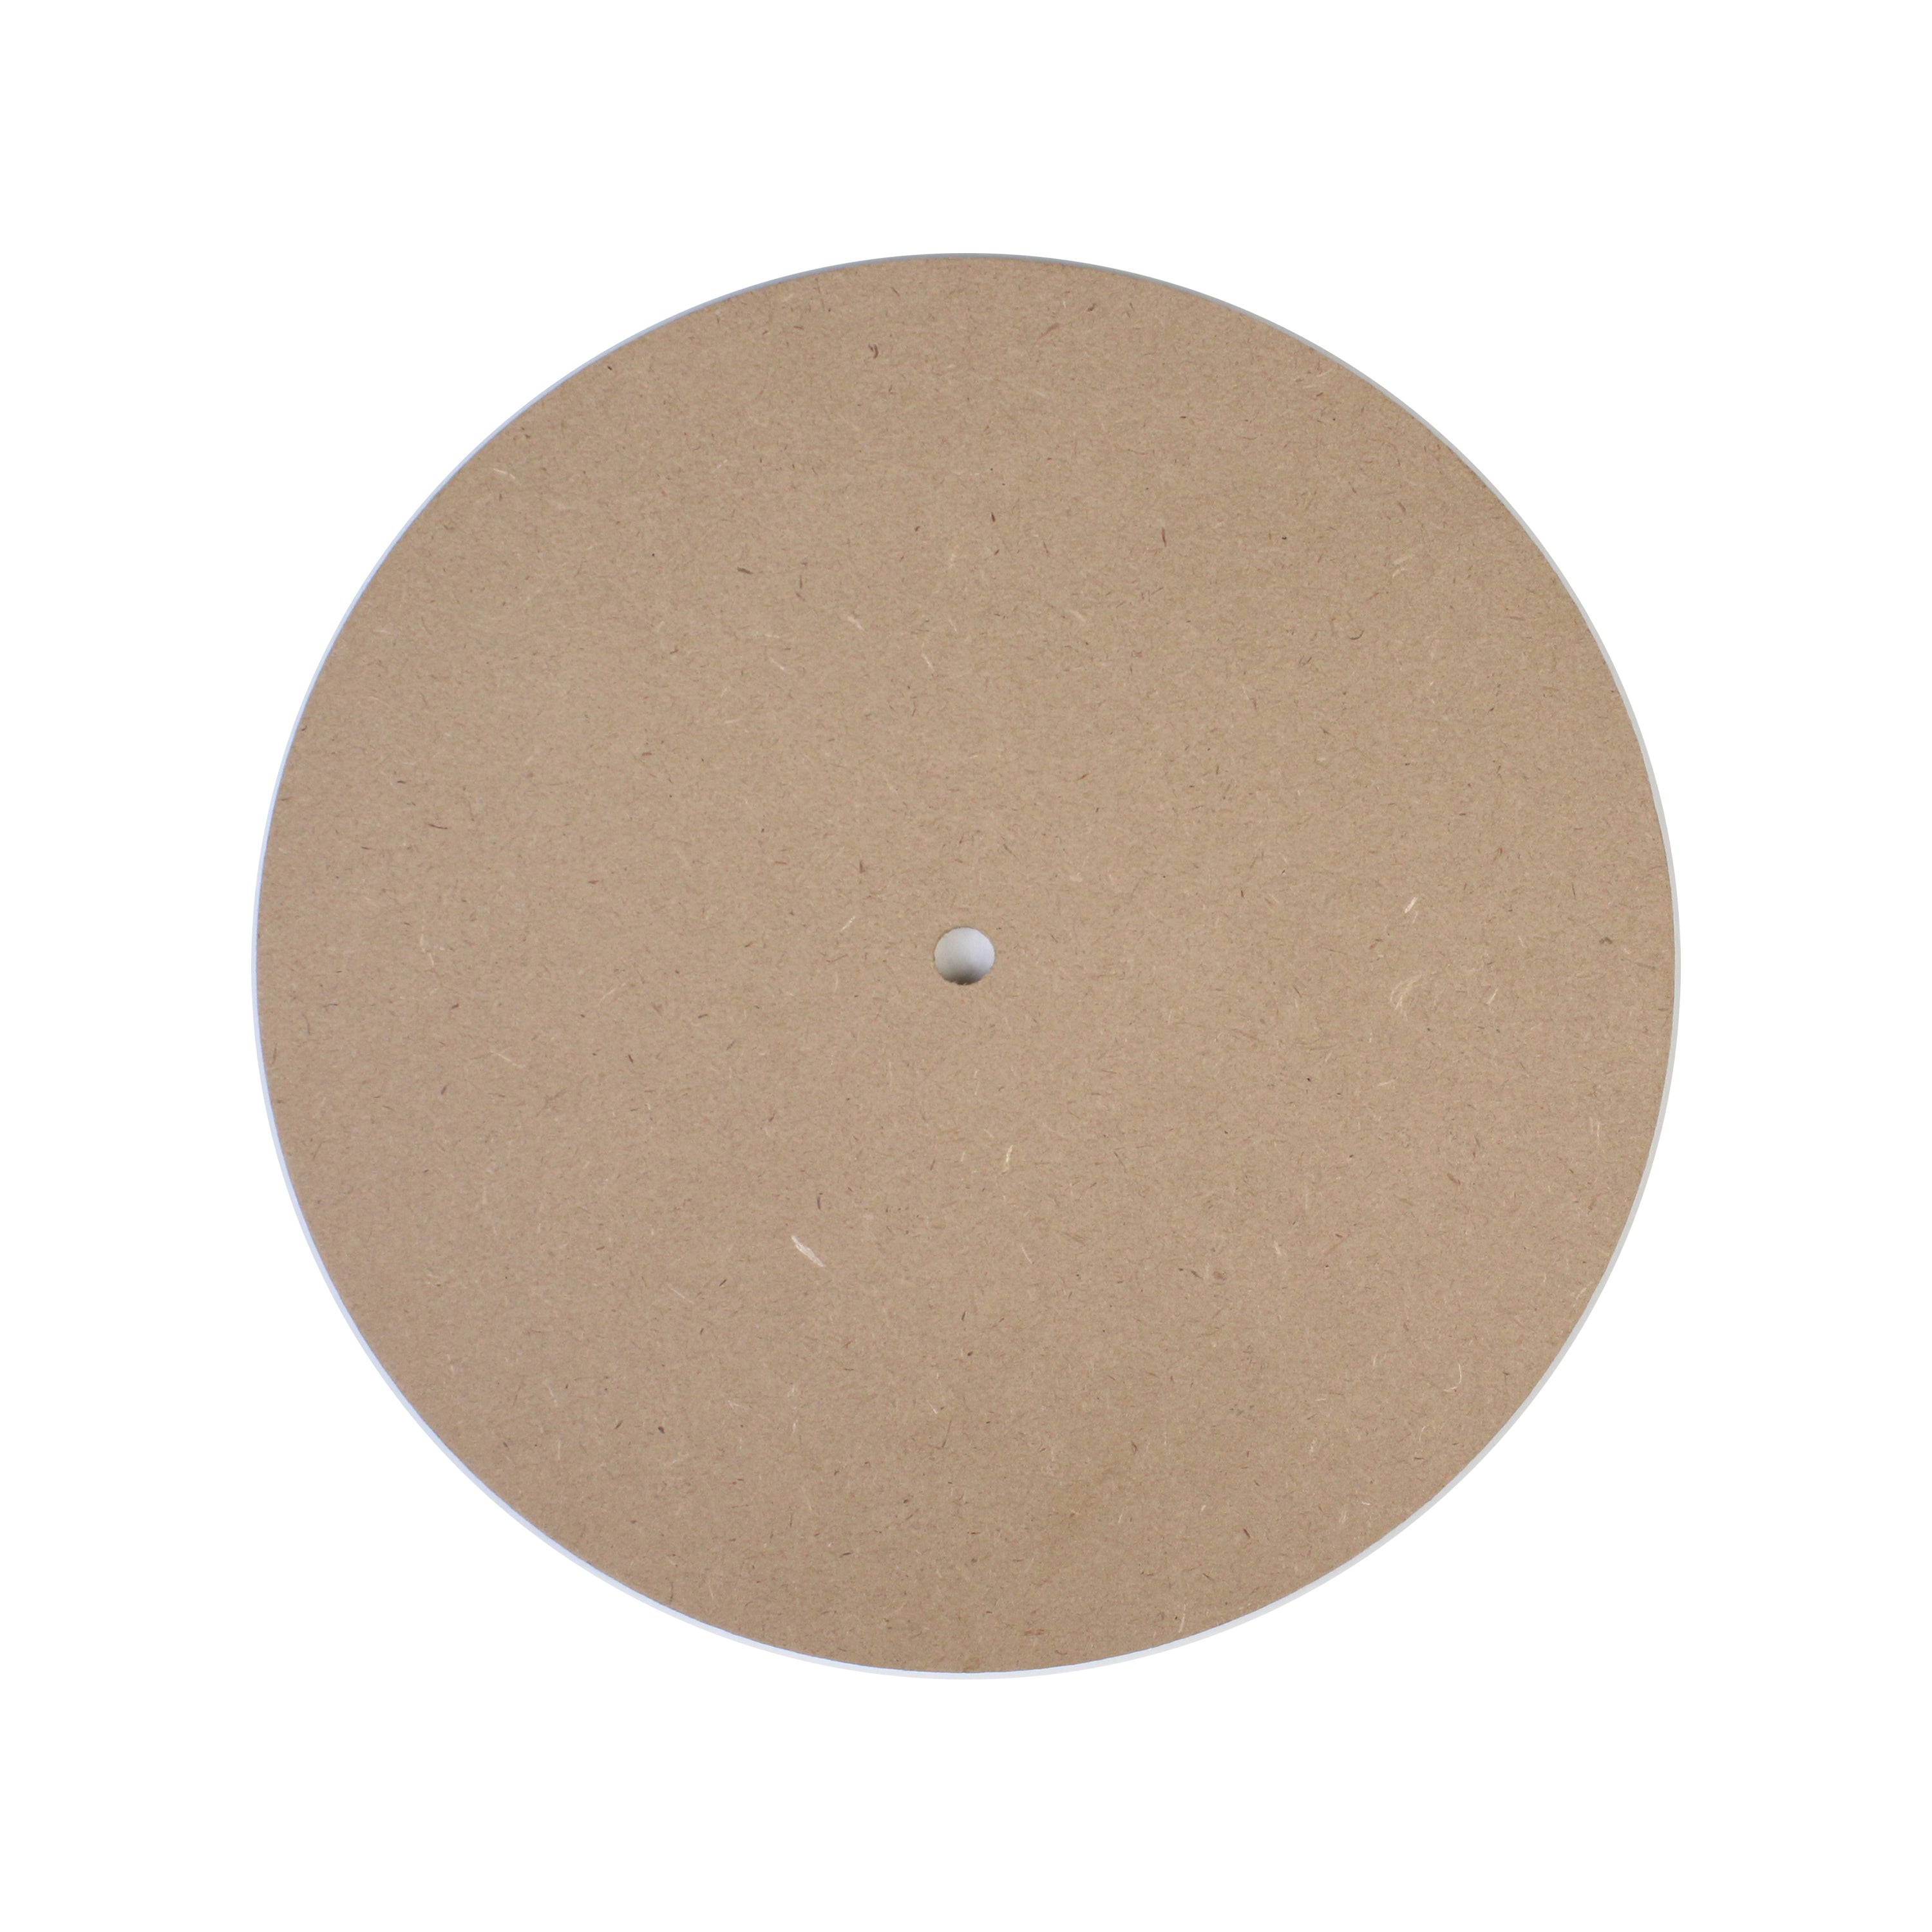 Mdf Clock Face 7Inch Dia 5.5Mm Thick 1Pc Lb